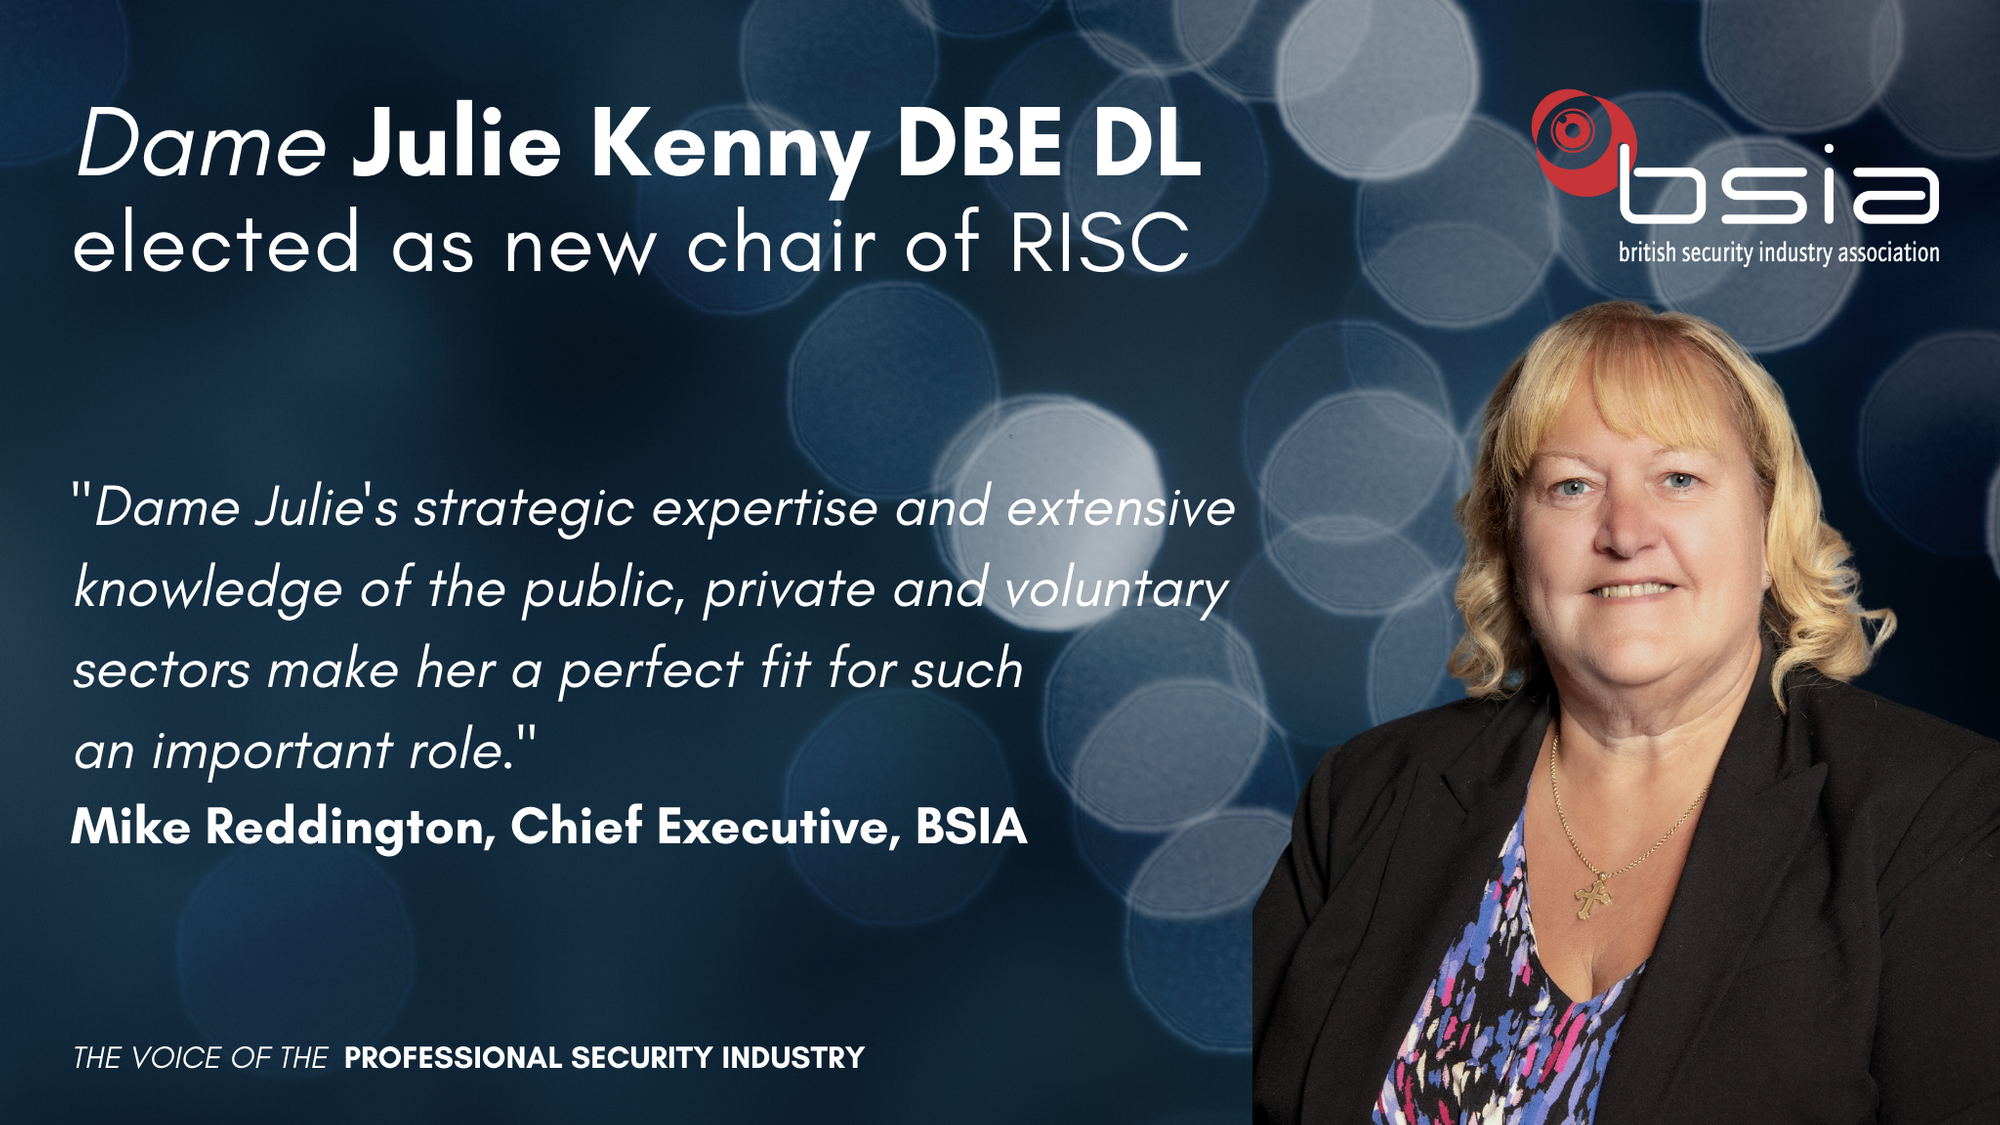 Dame Julie Kenny DBE DL elected as chair of RISC